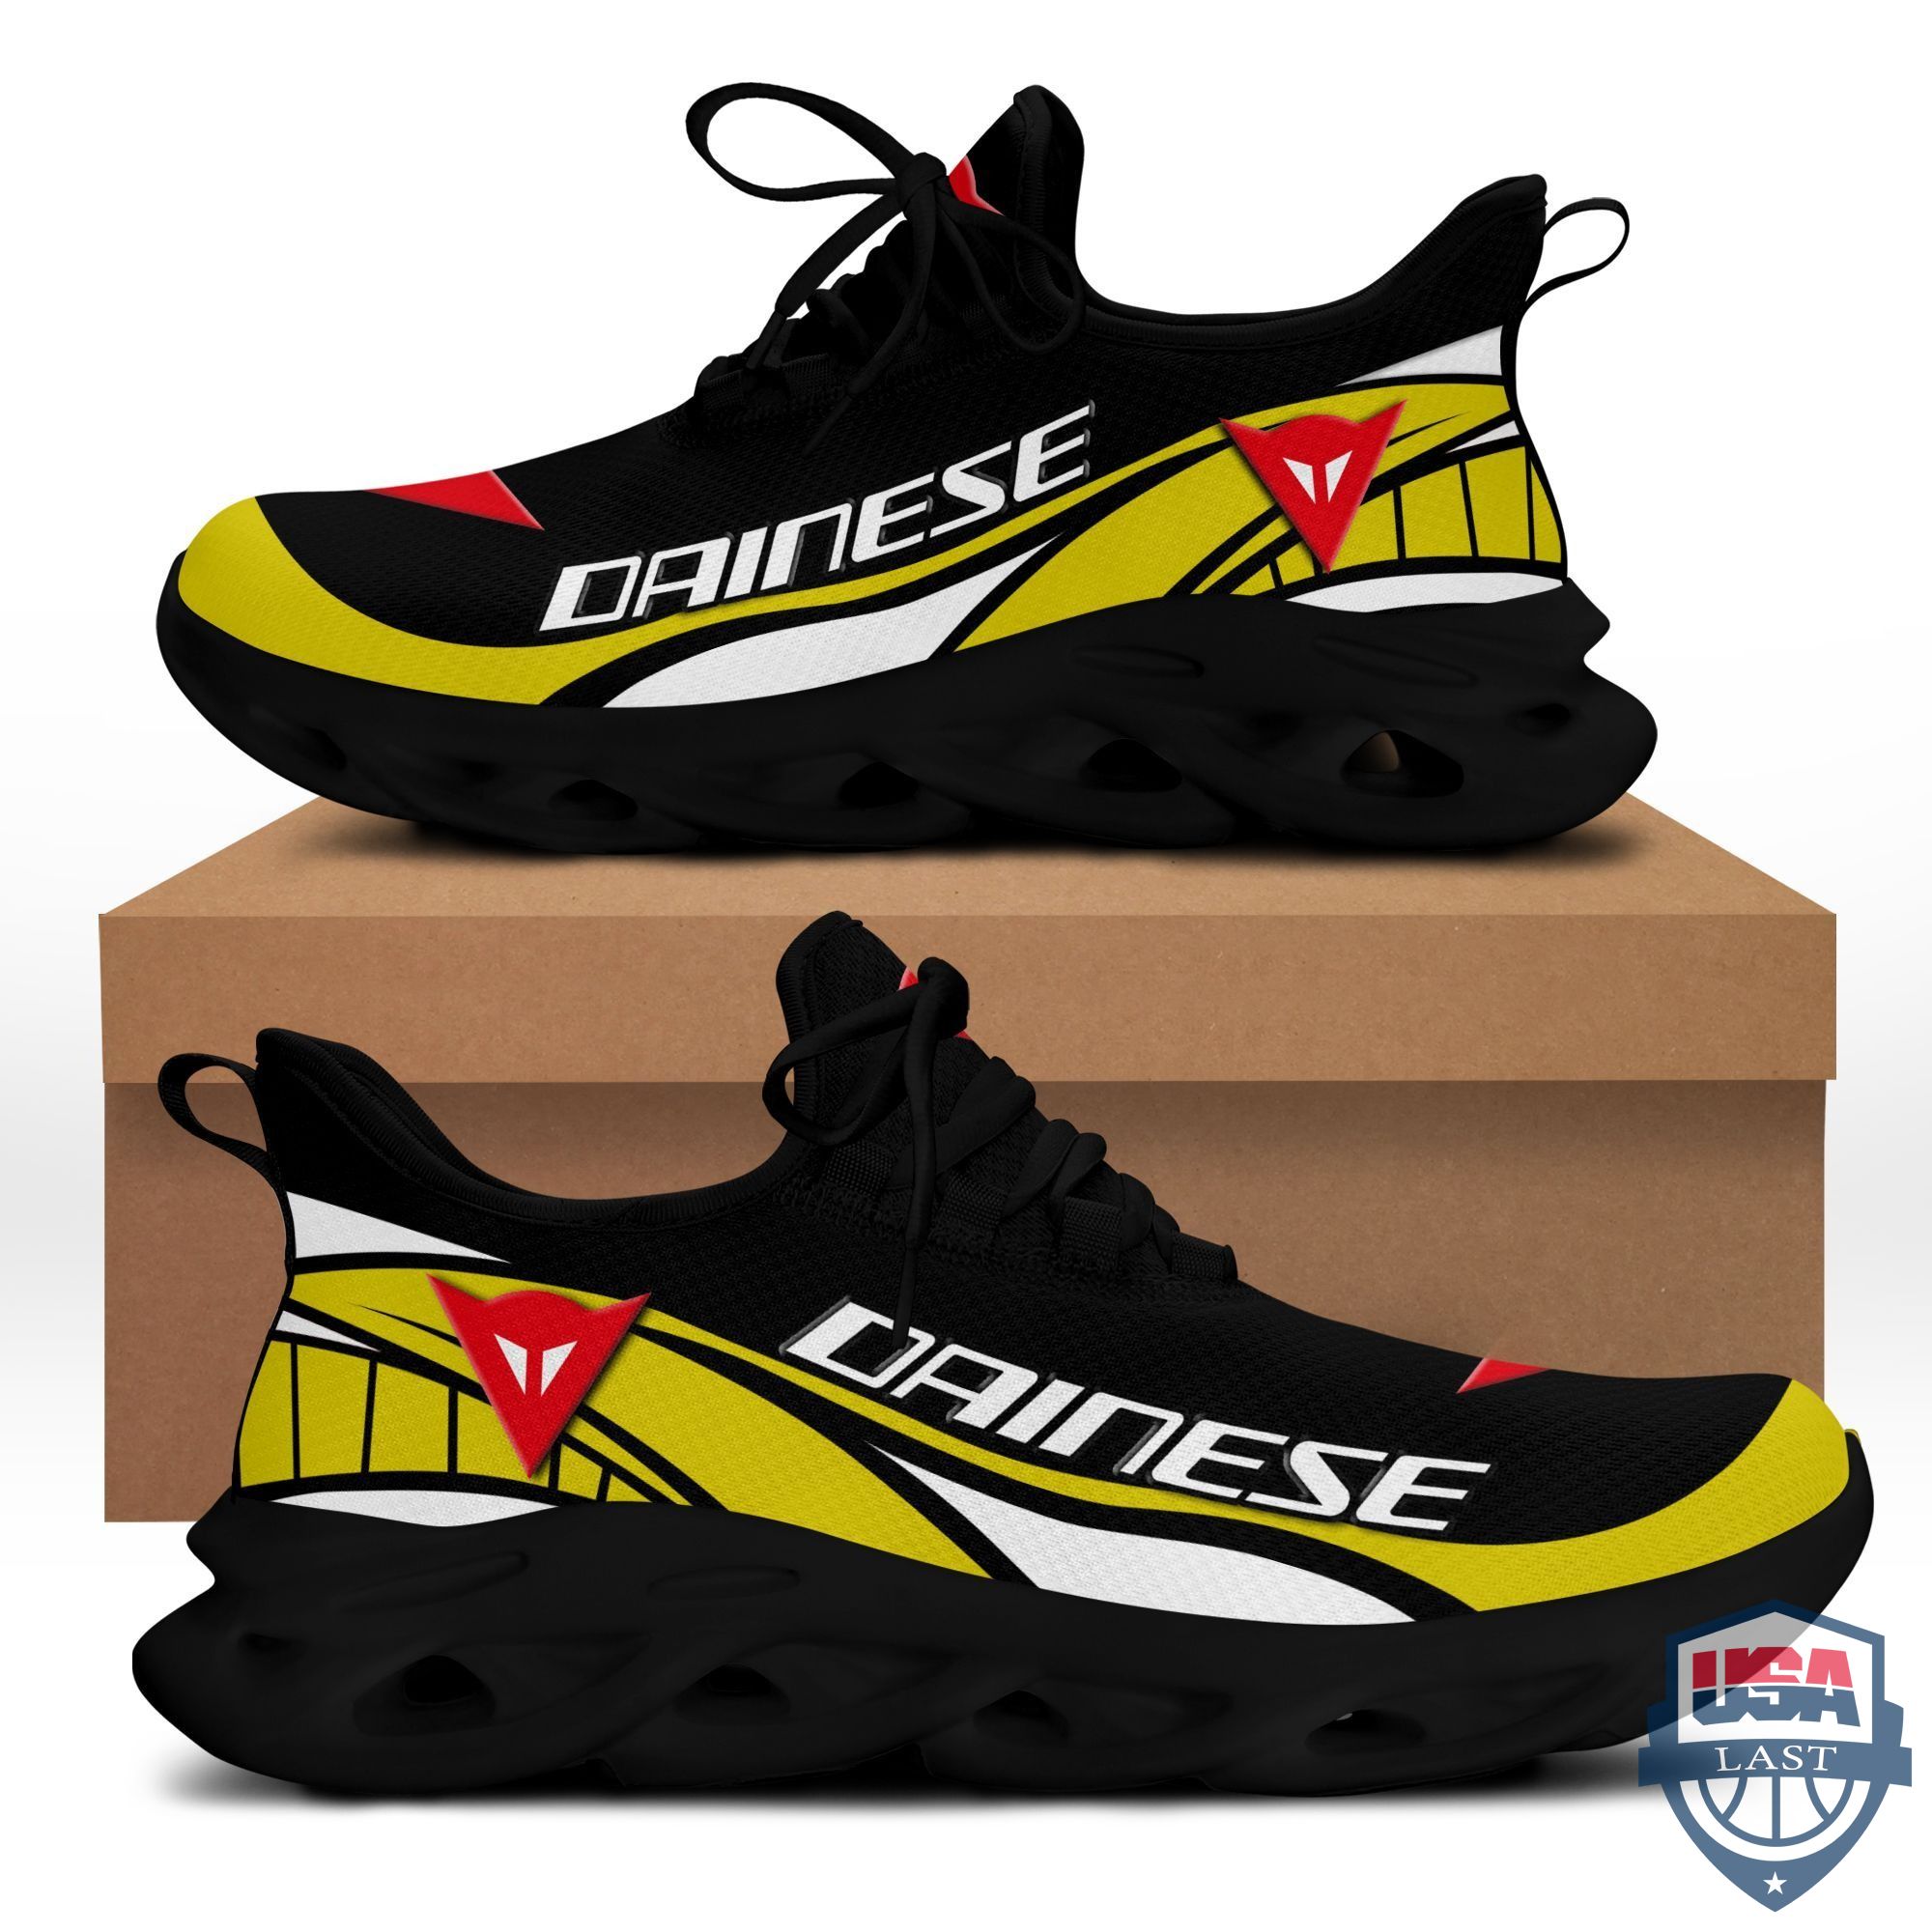 Dainese Clunky Max Soul Sneaker Yellow Version